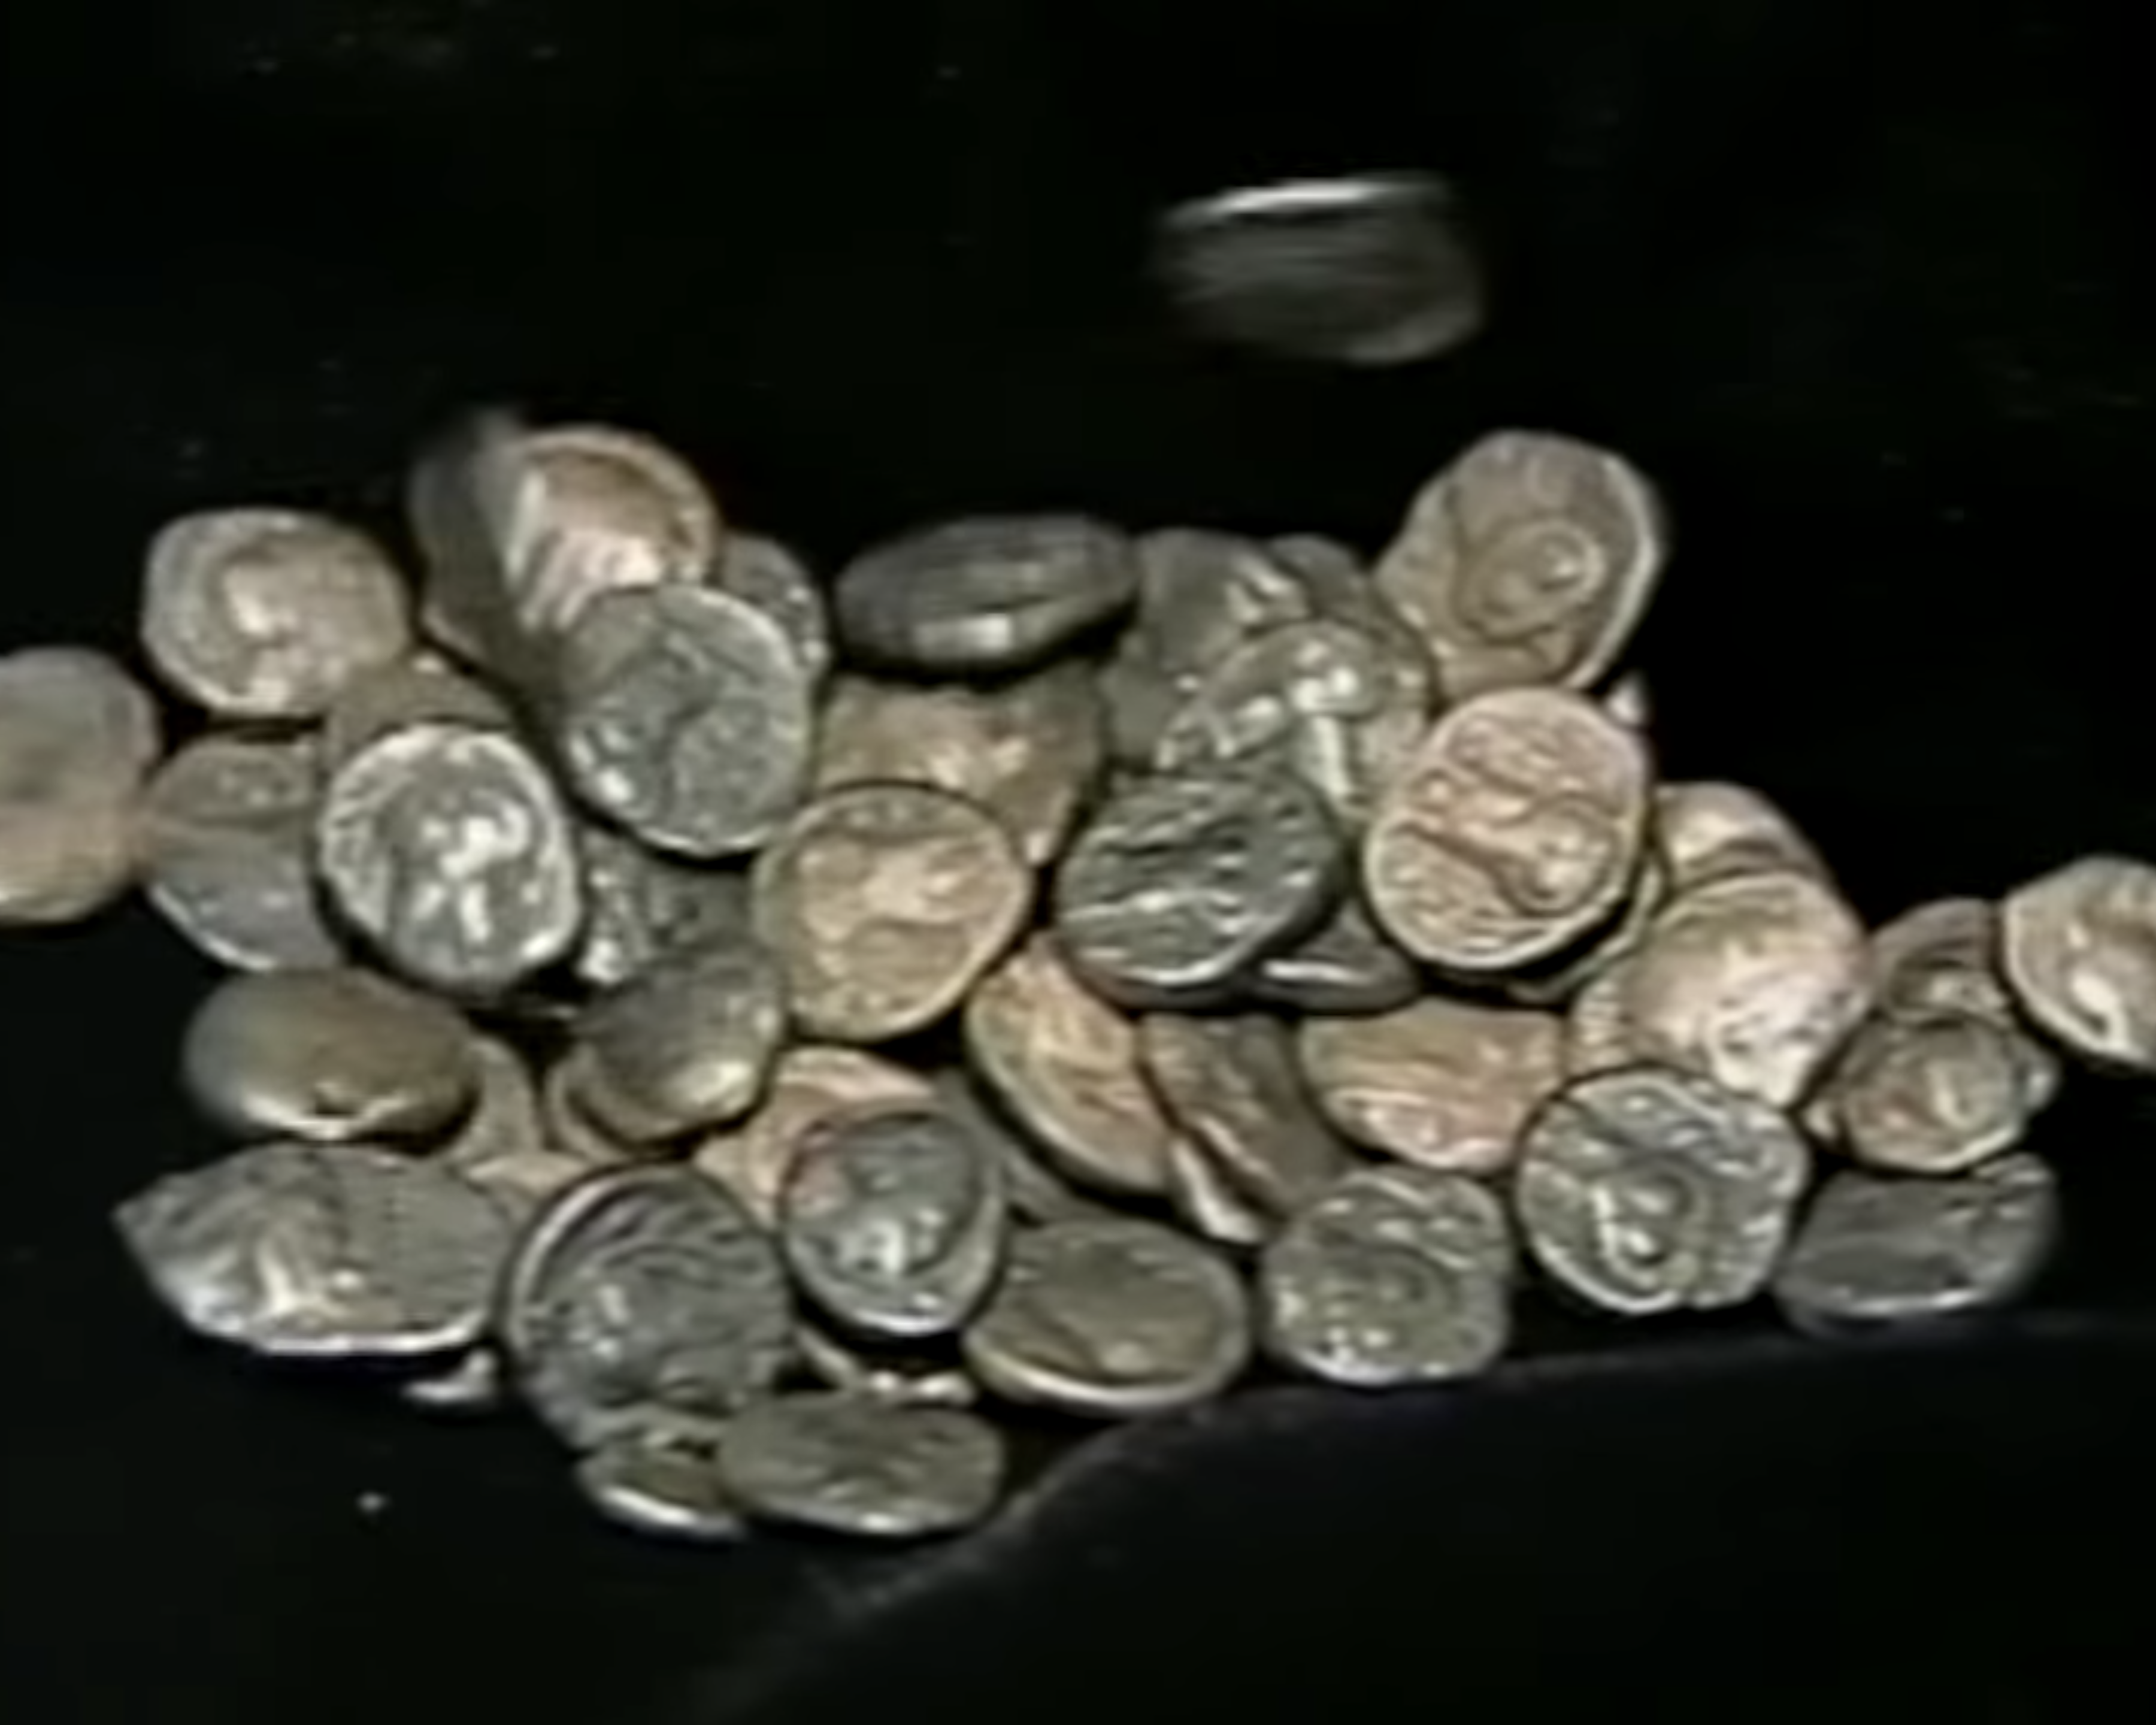 Screenshot of "Drachmas, Doubloons, and Dollars"